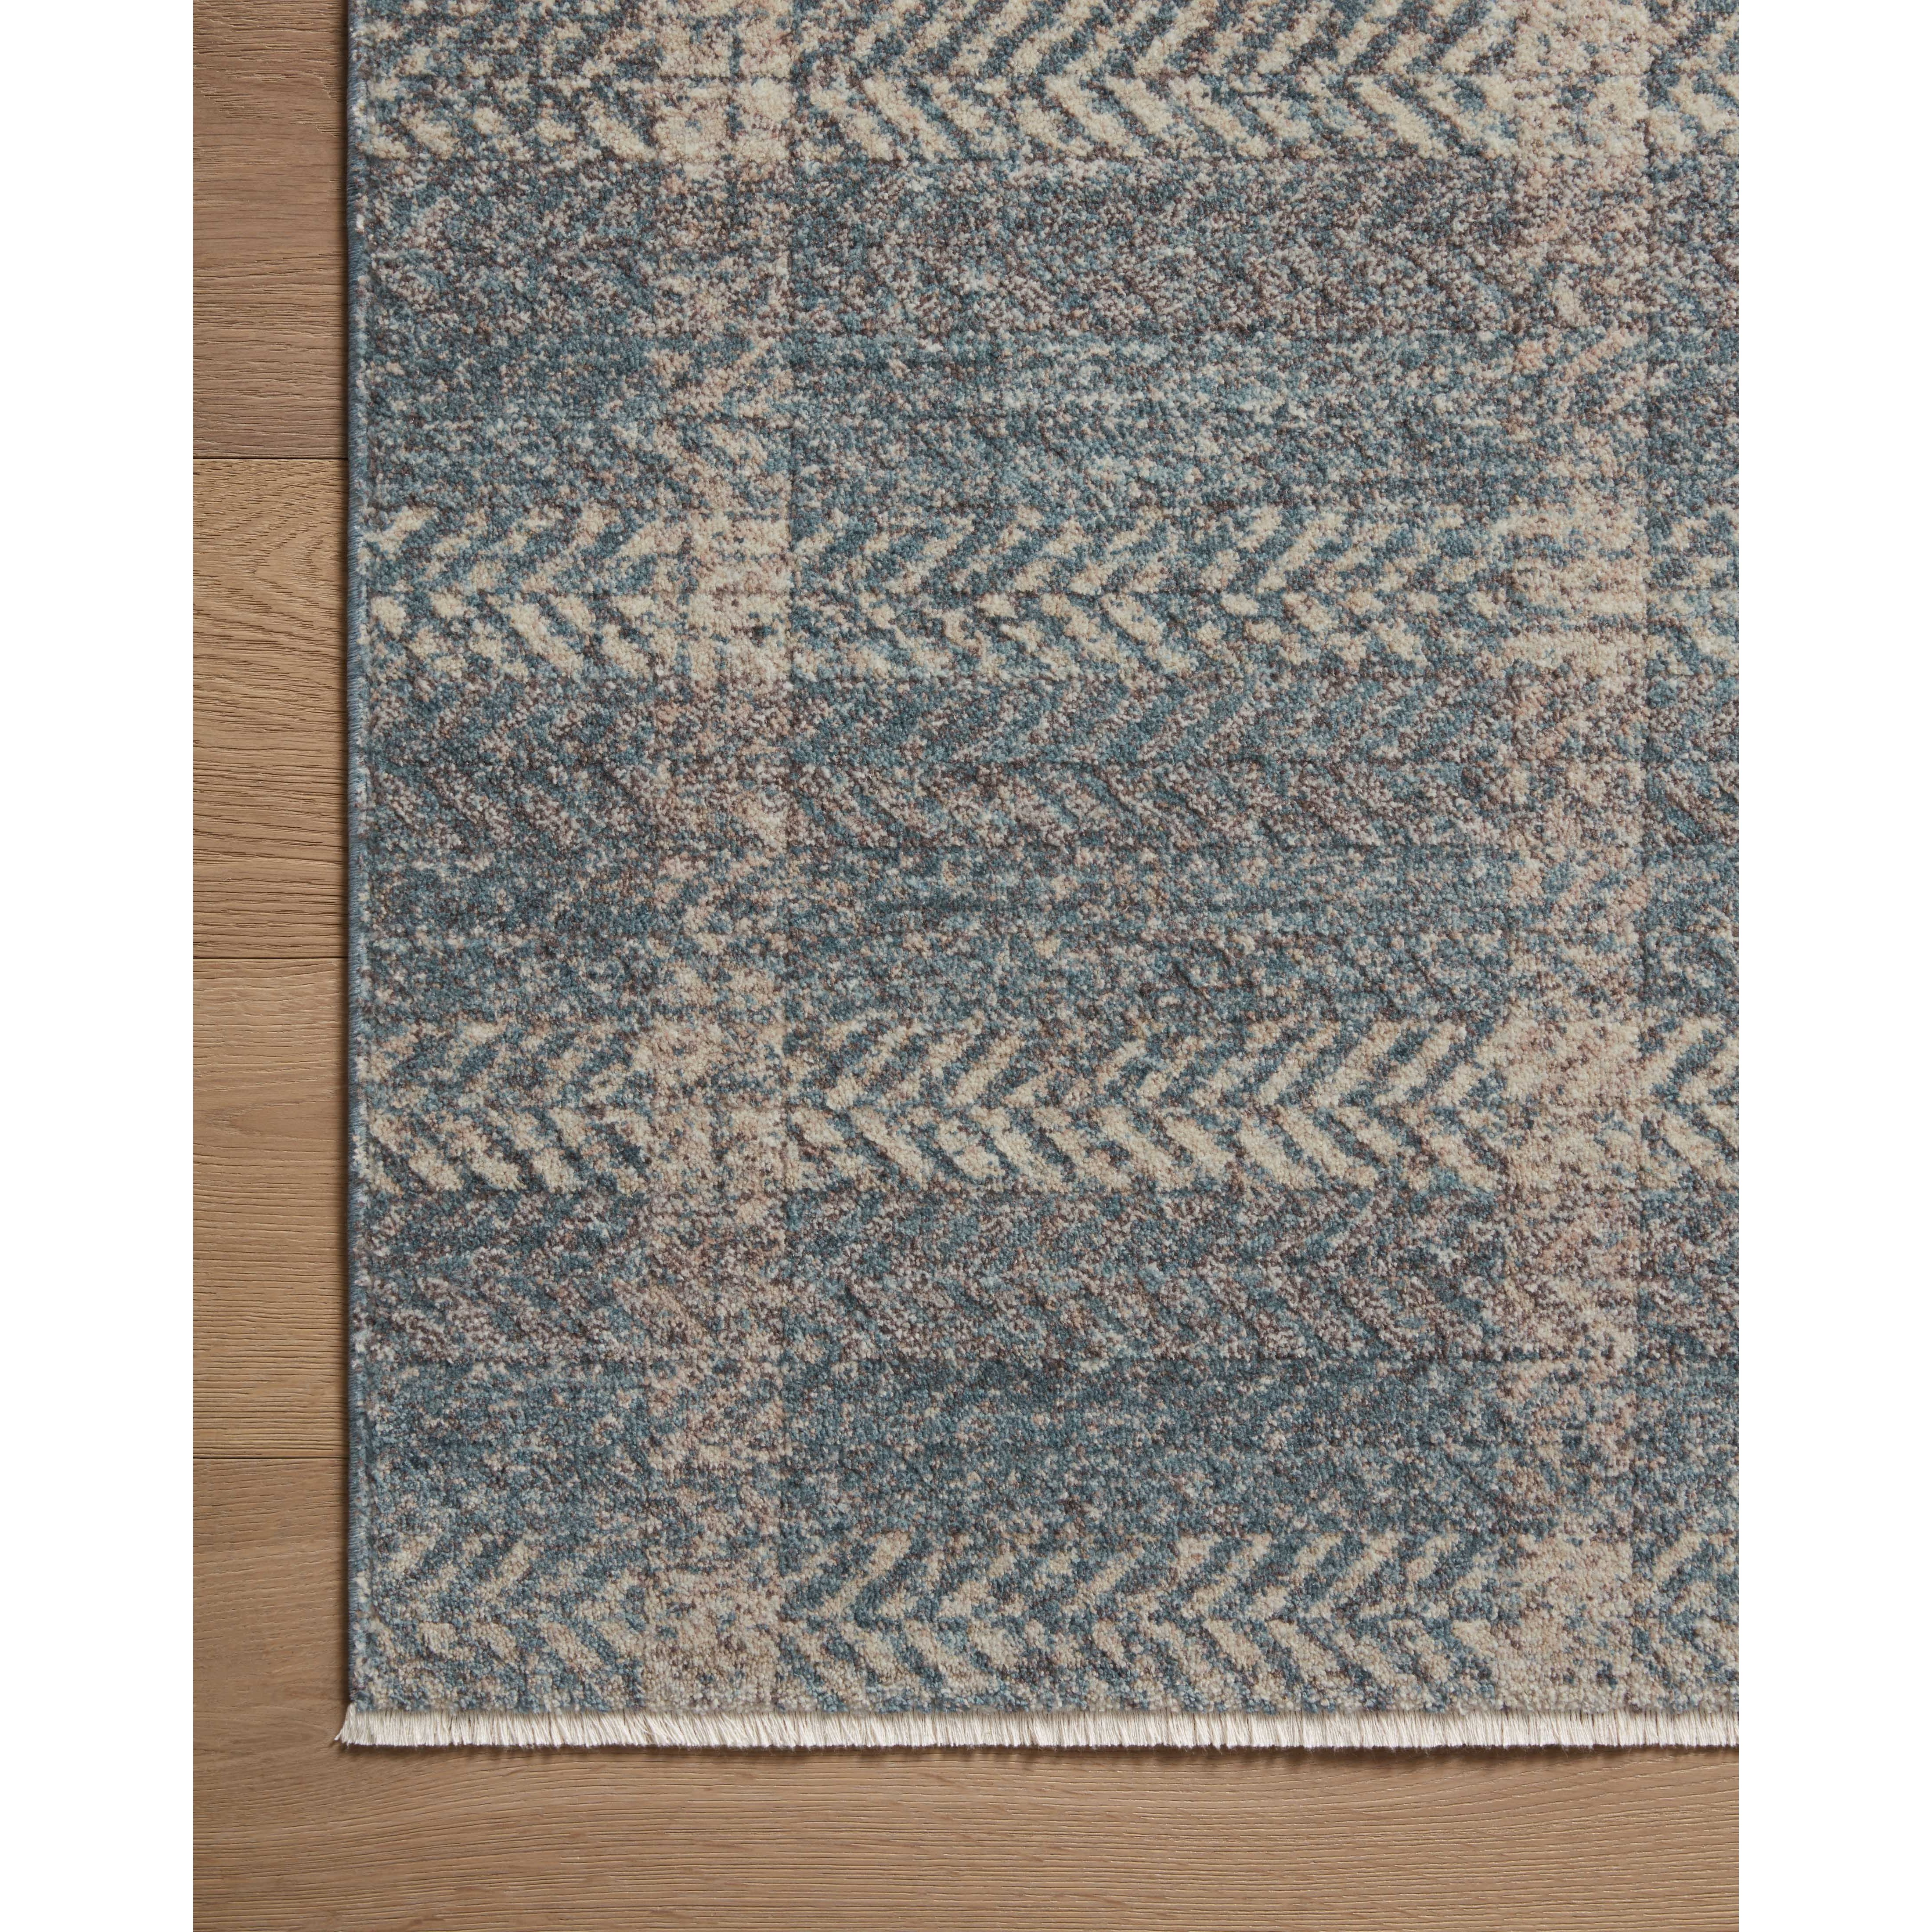 The Ember Collection by Angela Rose x Loloi is a modern flatweave area rug with a timeless plaid pattern that adds depth and coziness to any living room, bedroom, dining room, or hallway. Ember is power-loomed of 100% space-dyed polyester, a durable construction that creates a nuanced depth of color, available in a range of neutral palettes. Amethyst Home provides interior design, new home construction design consulting, vintage area rugs, and lighting in the Alpharetta metro area.